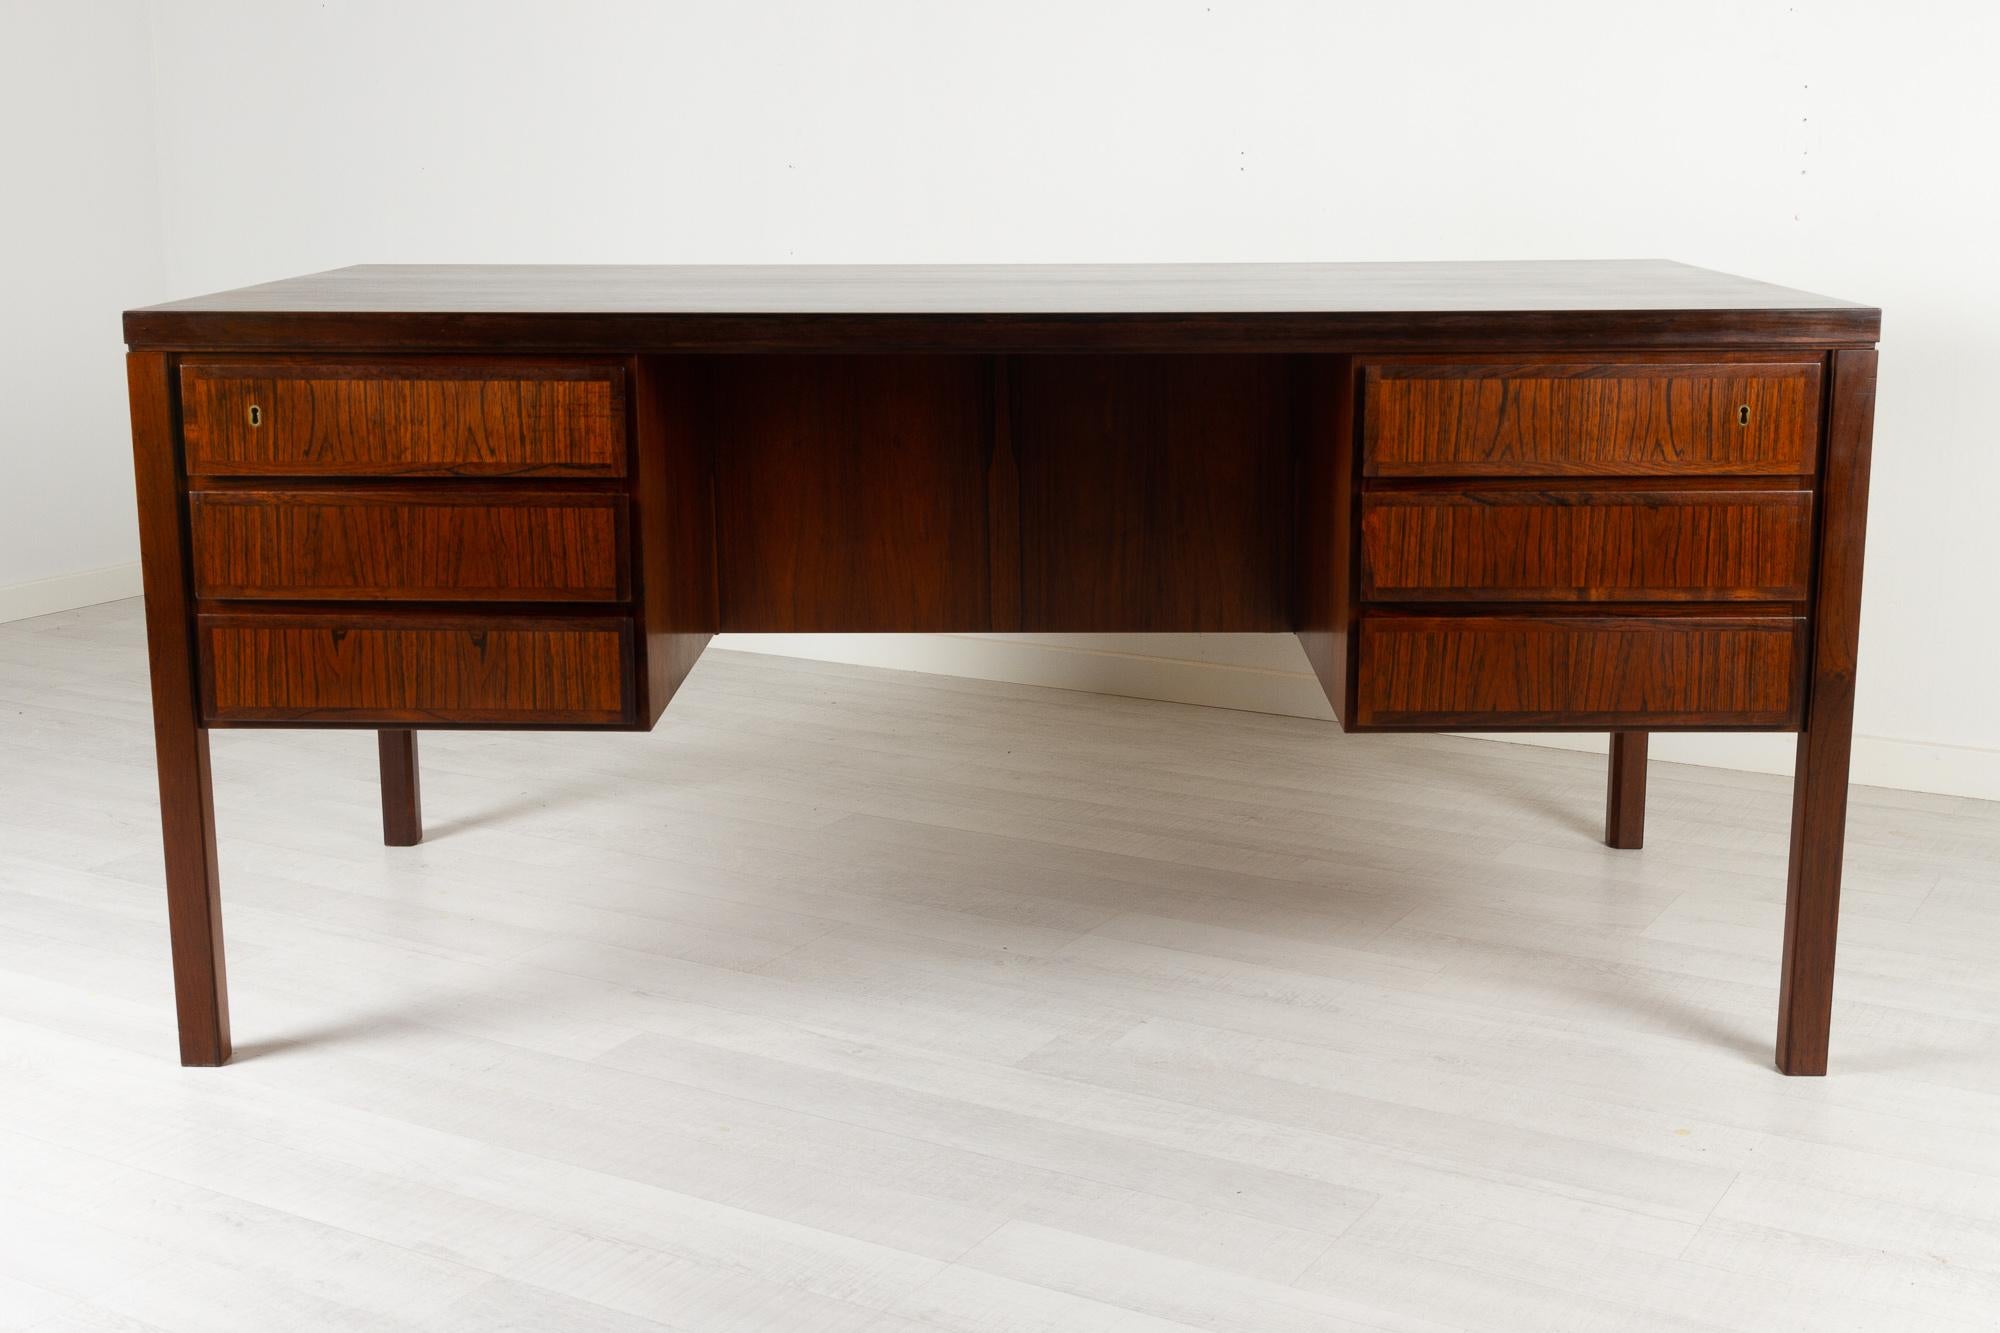 Vintage Danish Mid-Century Modern freestanding Rosewood desk by Omann Jun. 1960s
Large executive free standing writing desk in Rosewood Model No. 77 made by Omann Jun, Denmark.
Minimalistic cubic design with clean lines. 

Six drawers in front.